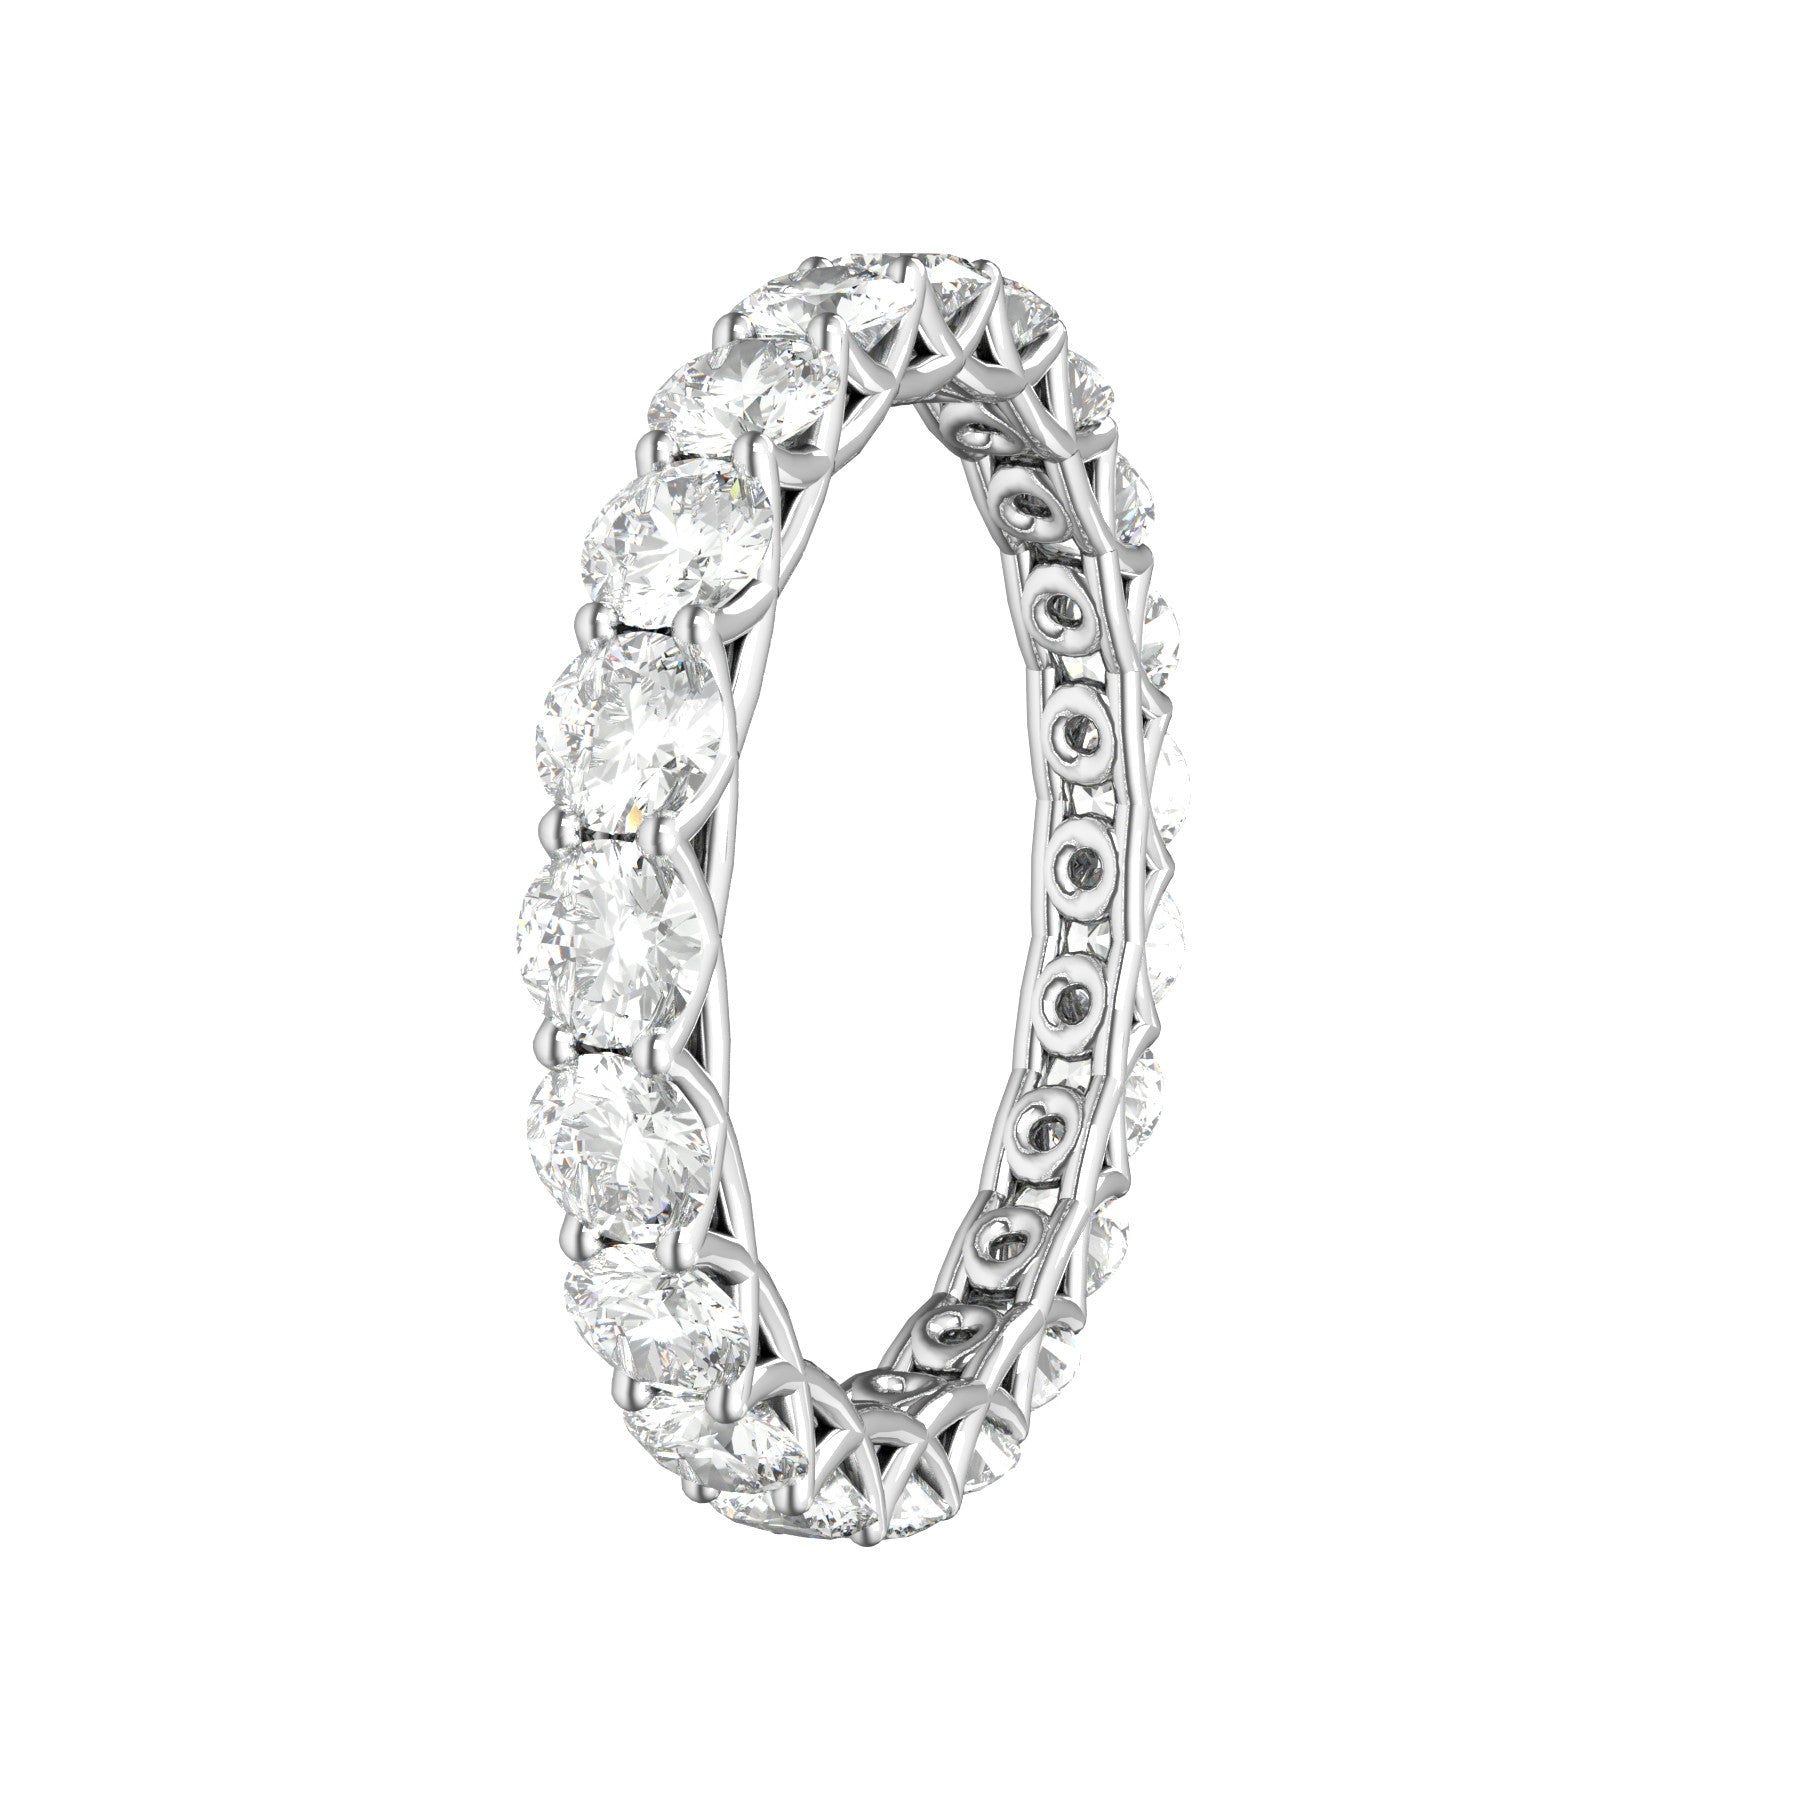 sweet hearts wedding band, 18 K white gold, 0,10 natural diamonds, weight about 1,90 g. (0.07 oz), width 3,00 mm